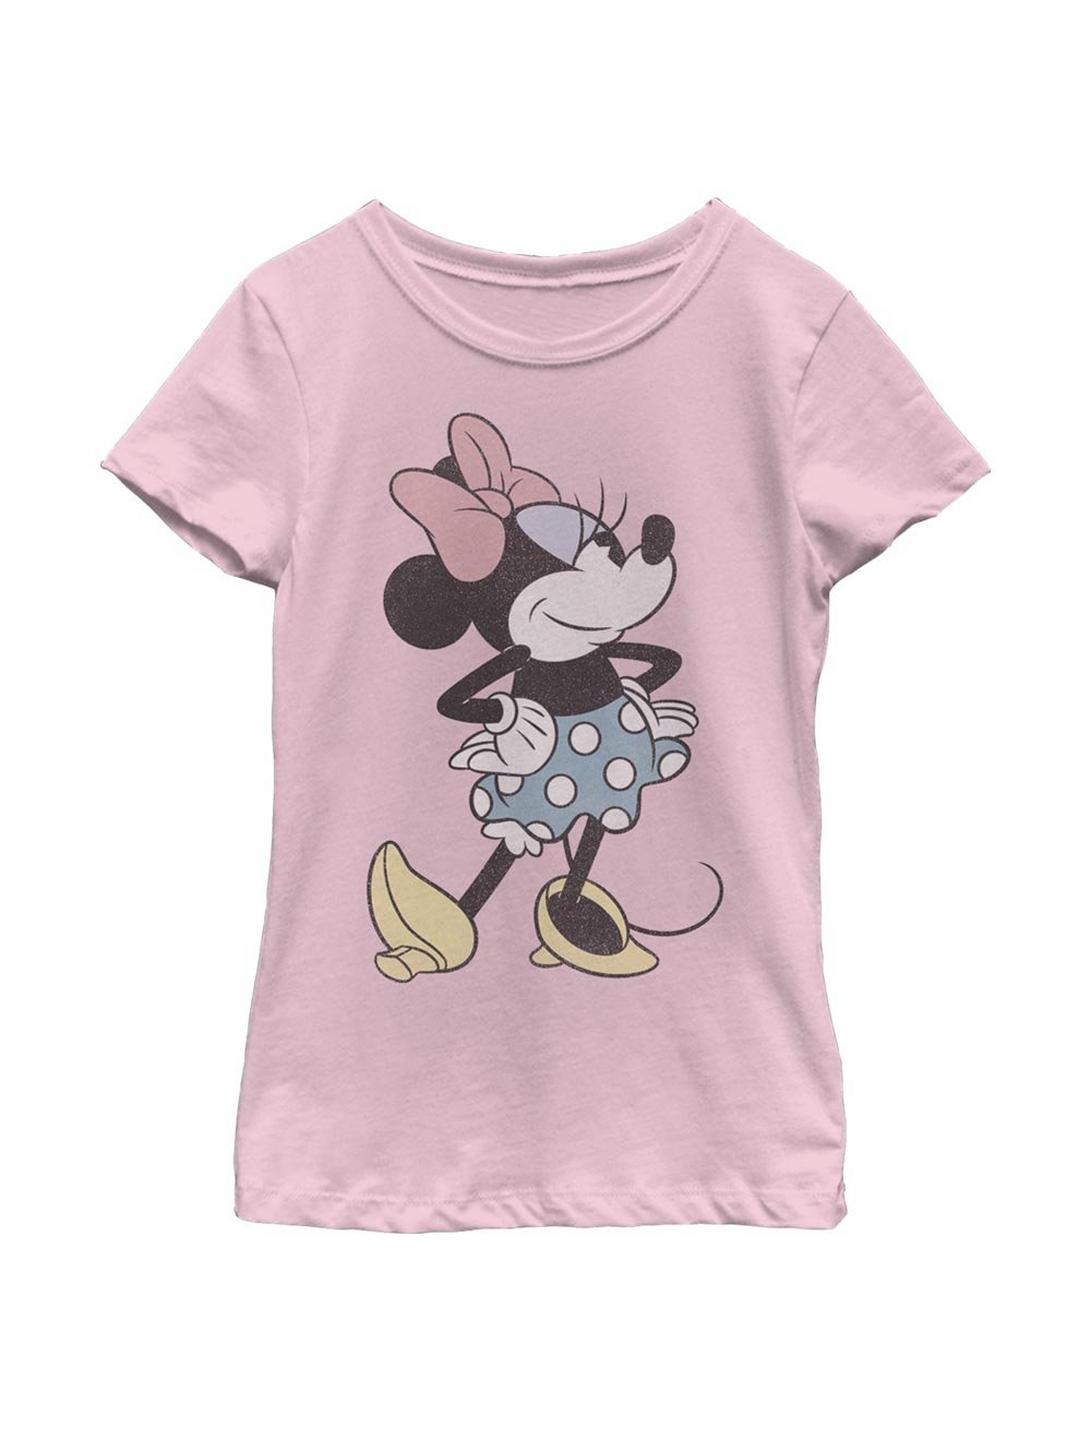 Disney Mickey Mouse Minnie Youth Girls T-Shirt, PINK, hi-res